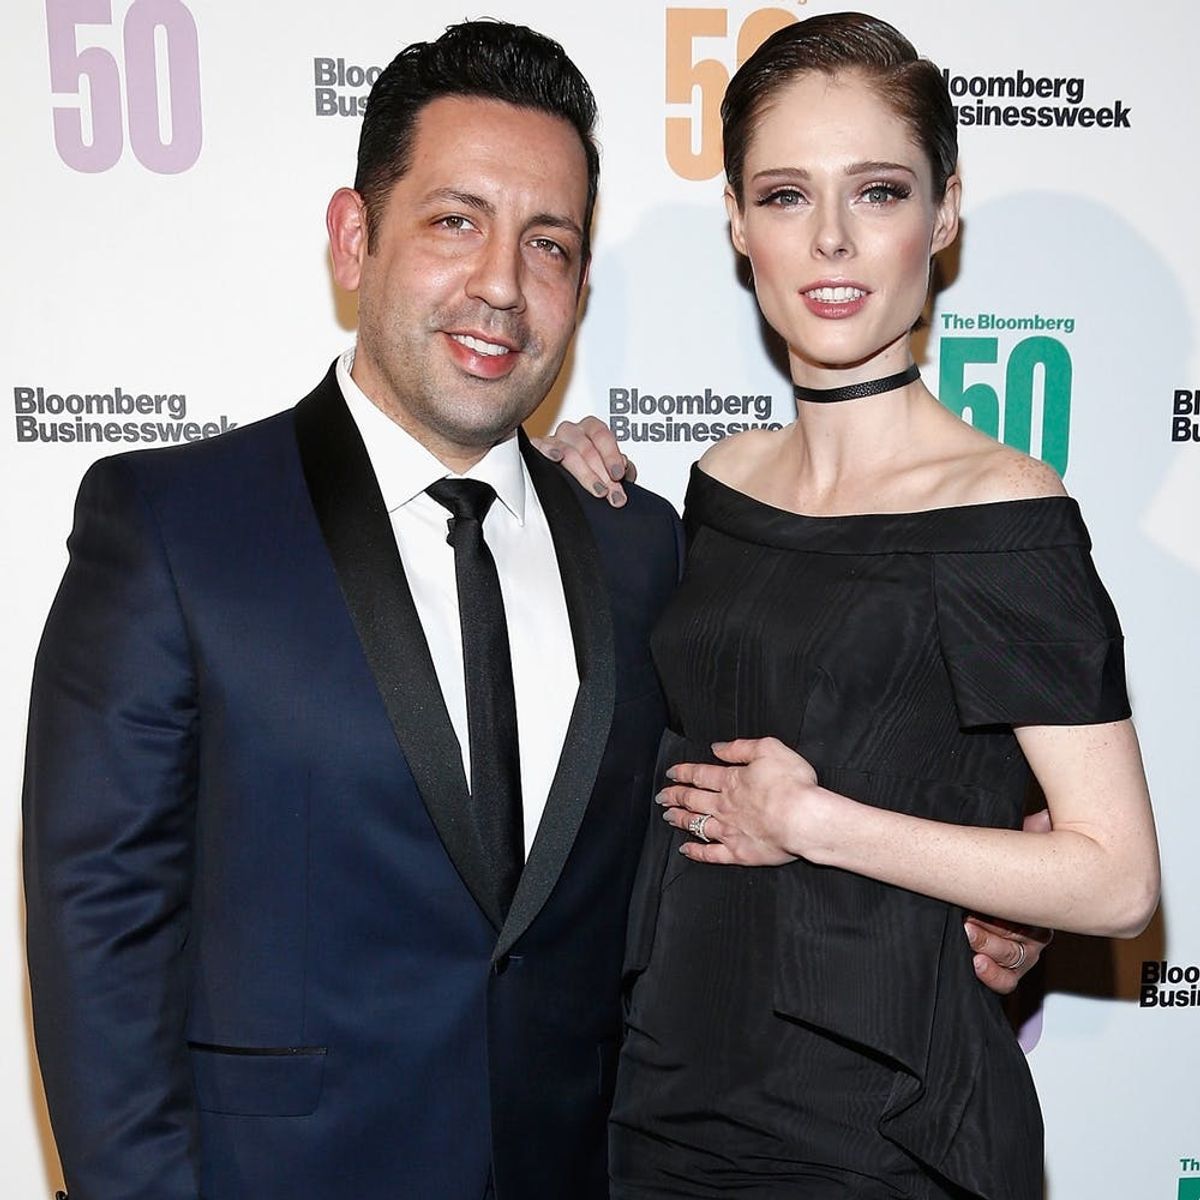 Coco Rocha Reveals She’s Pregnant With Baby #2 in the Cutest Video